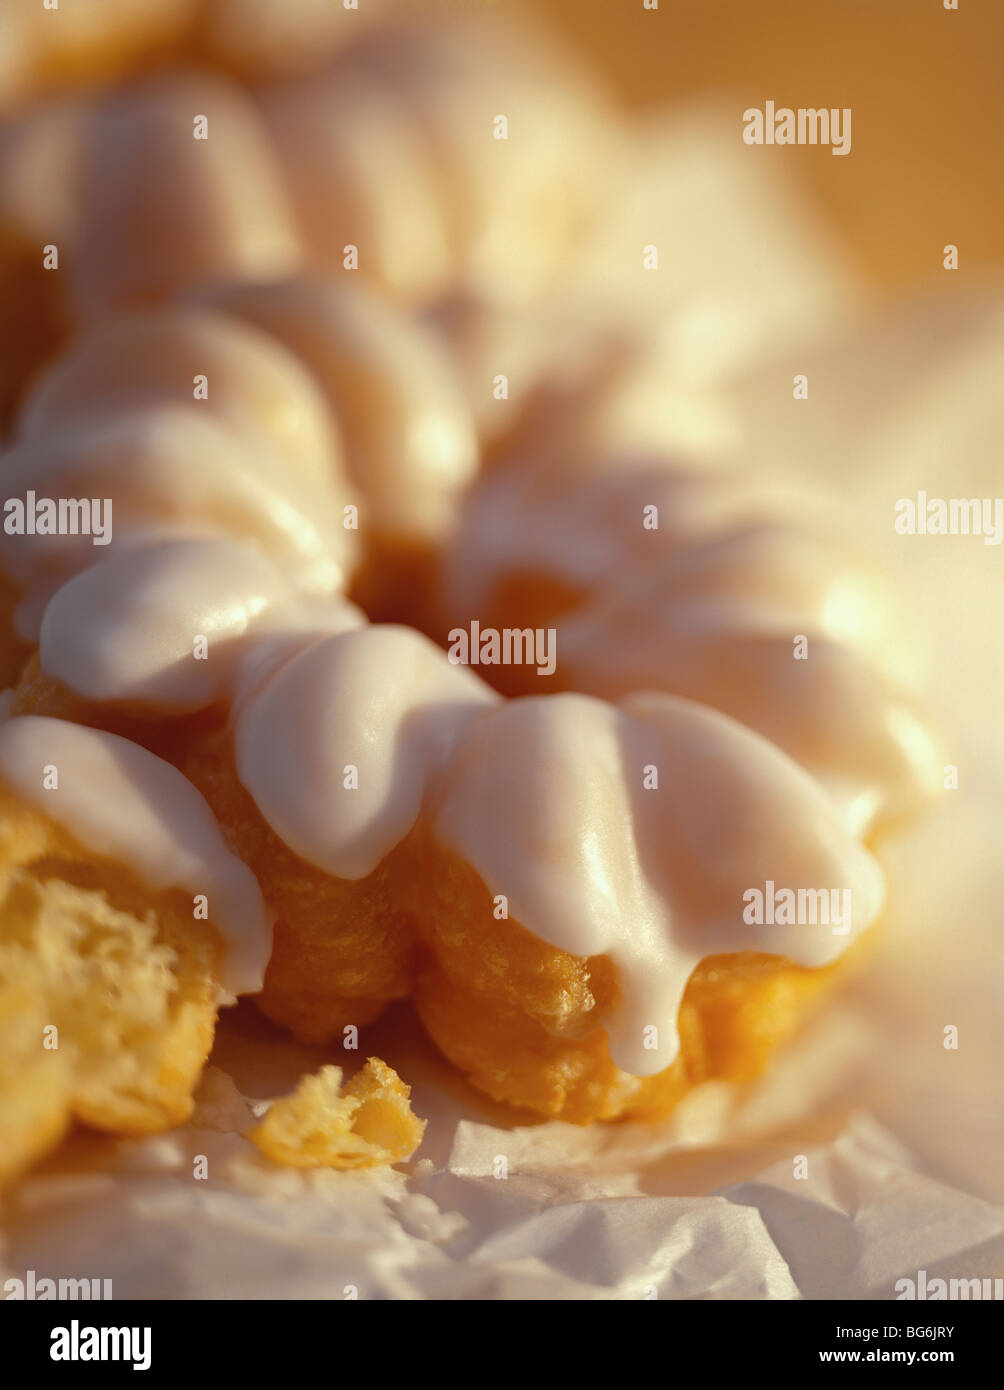 Old fashioned glazed donuts Stock Photo